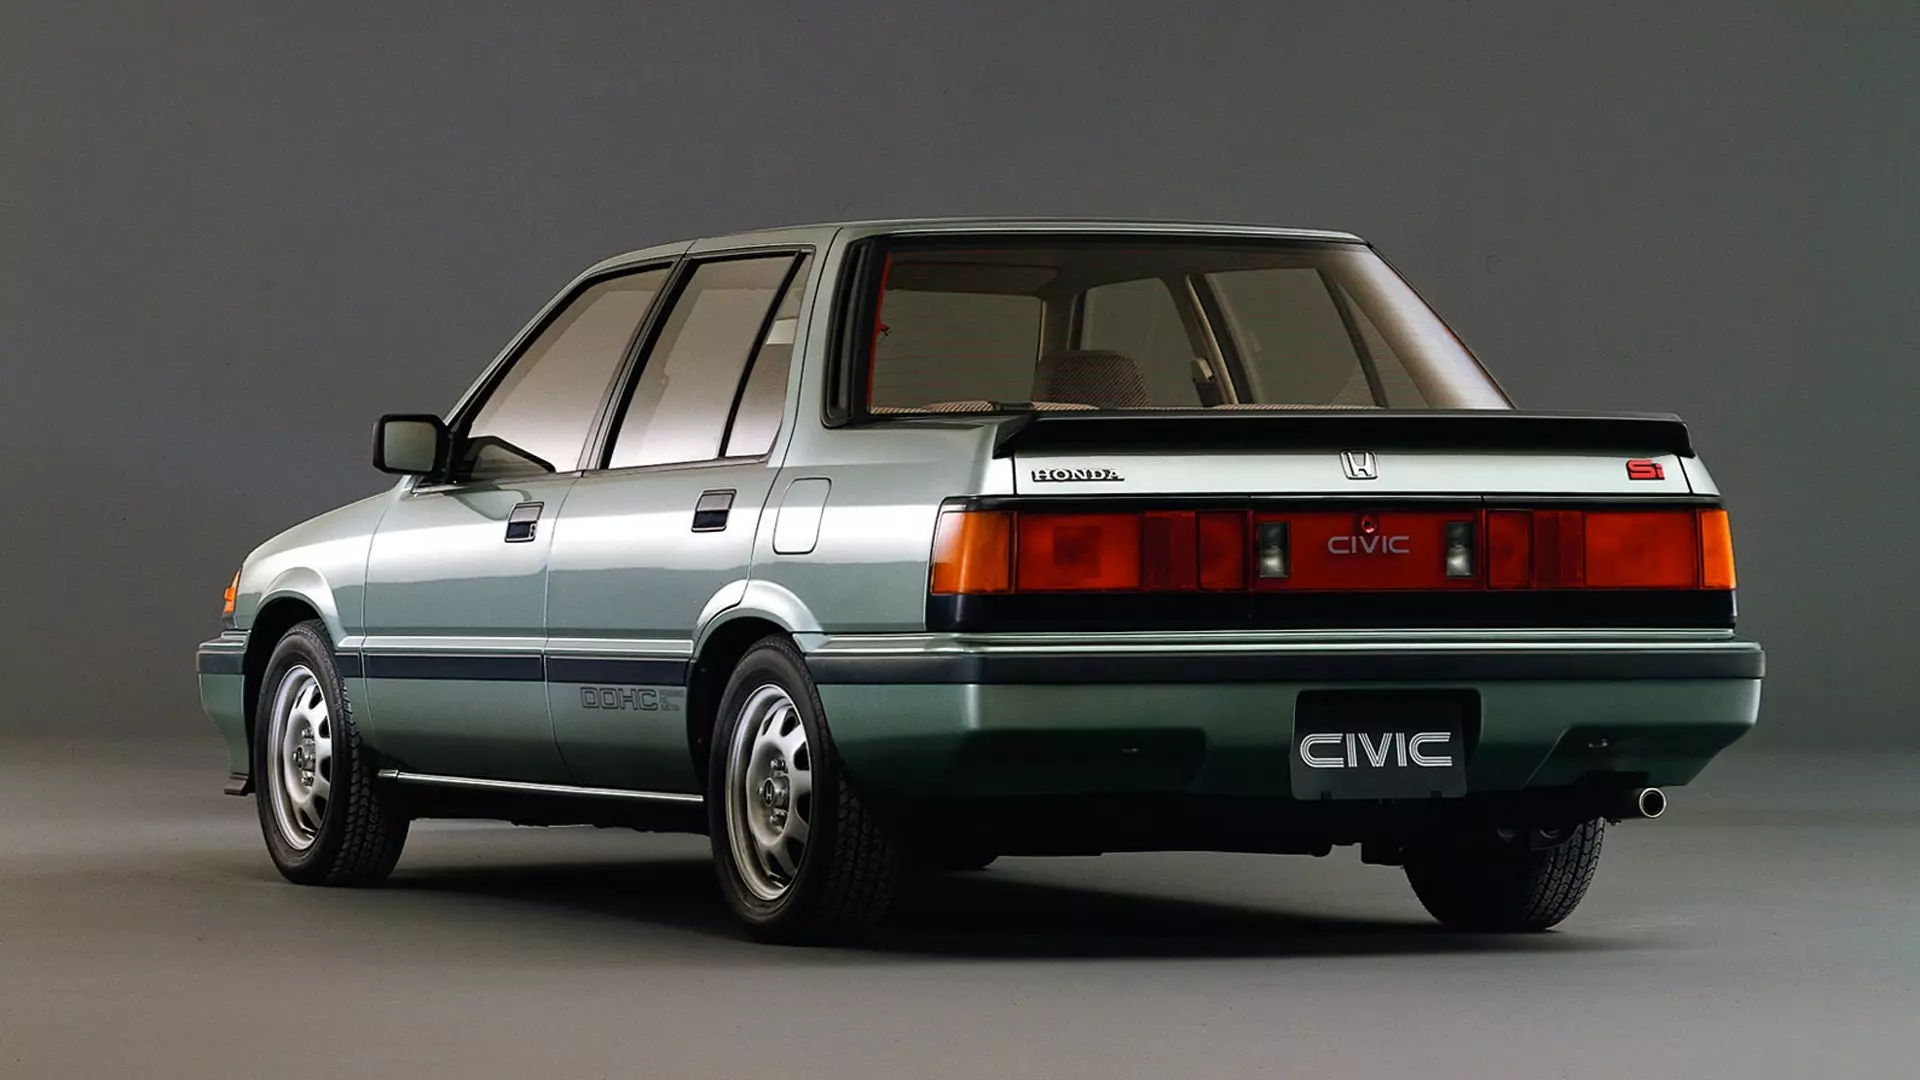 Americans Might Not Know That the Honda Civic Si Sedan Existed in the ’80s